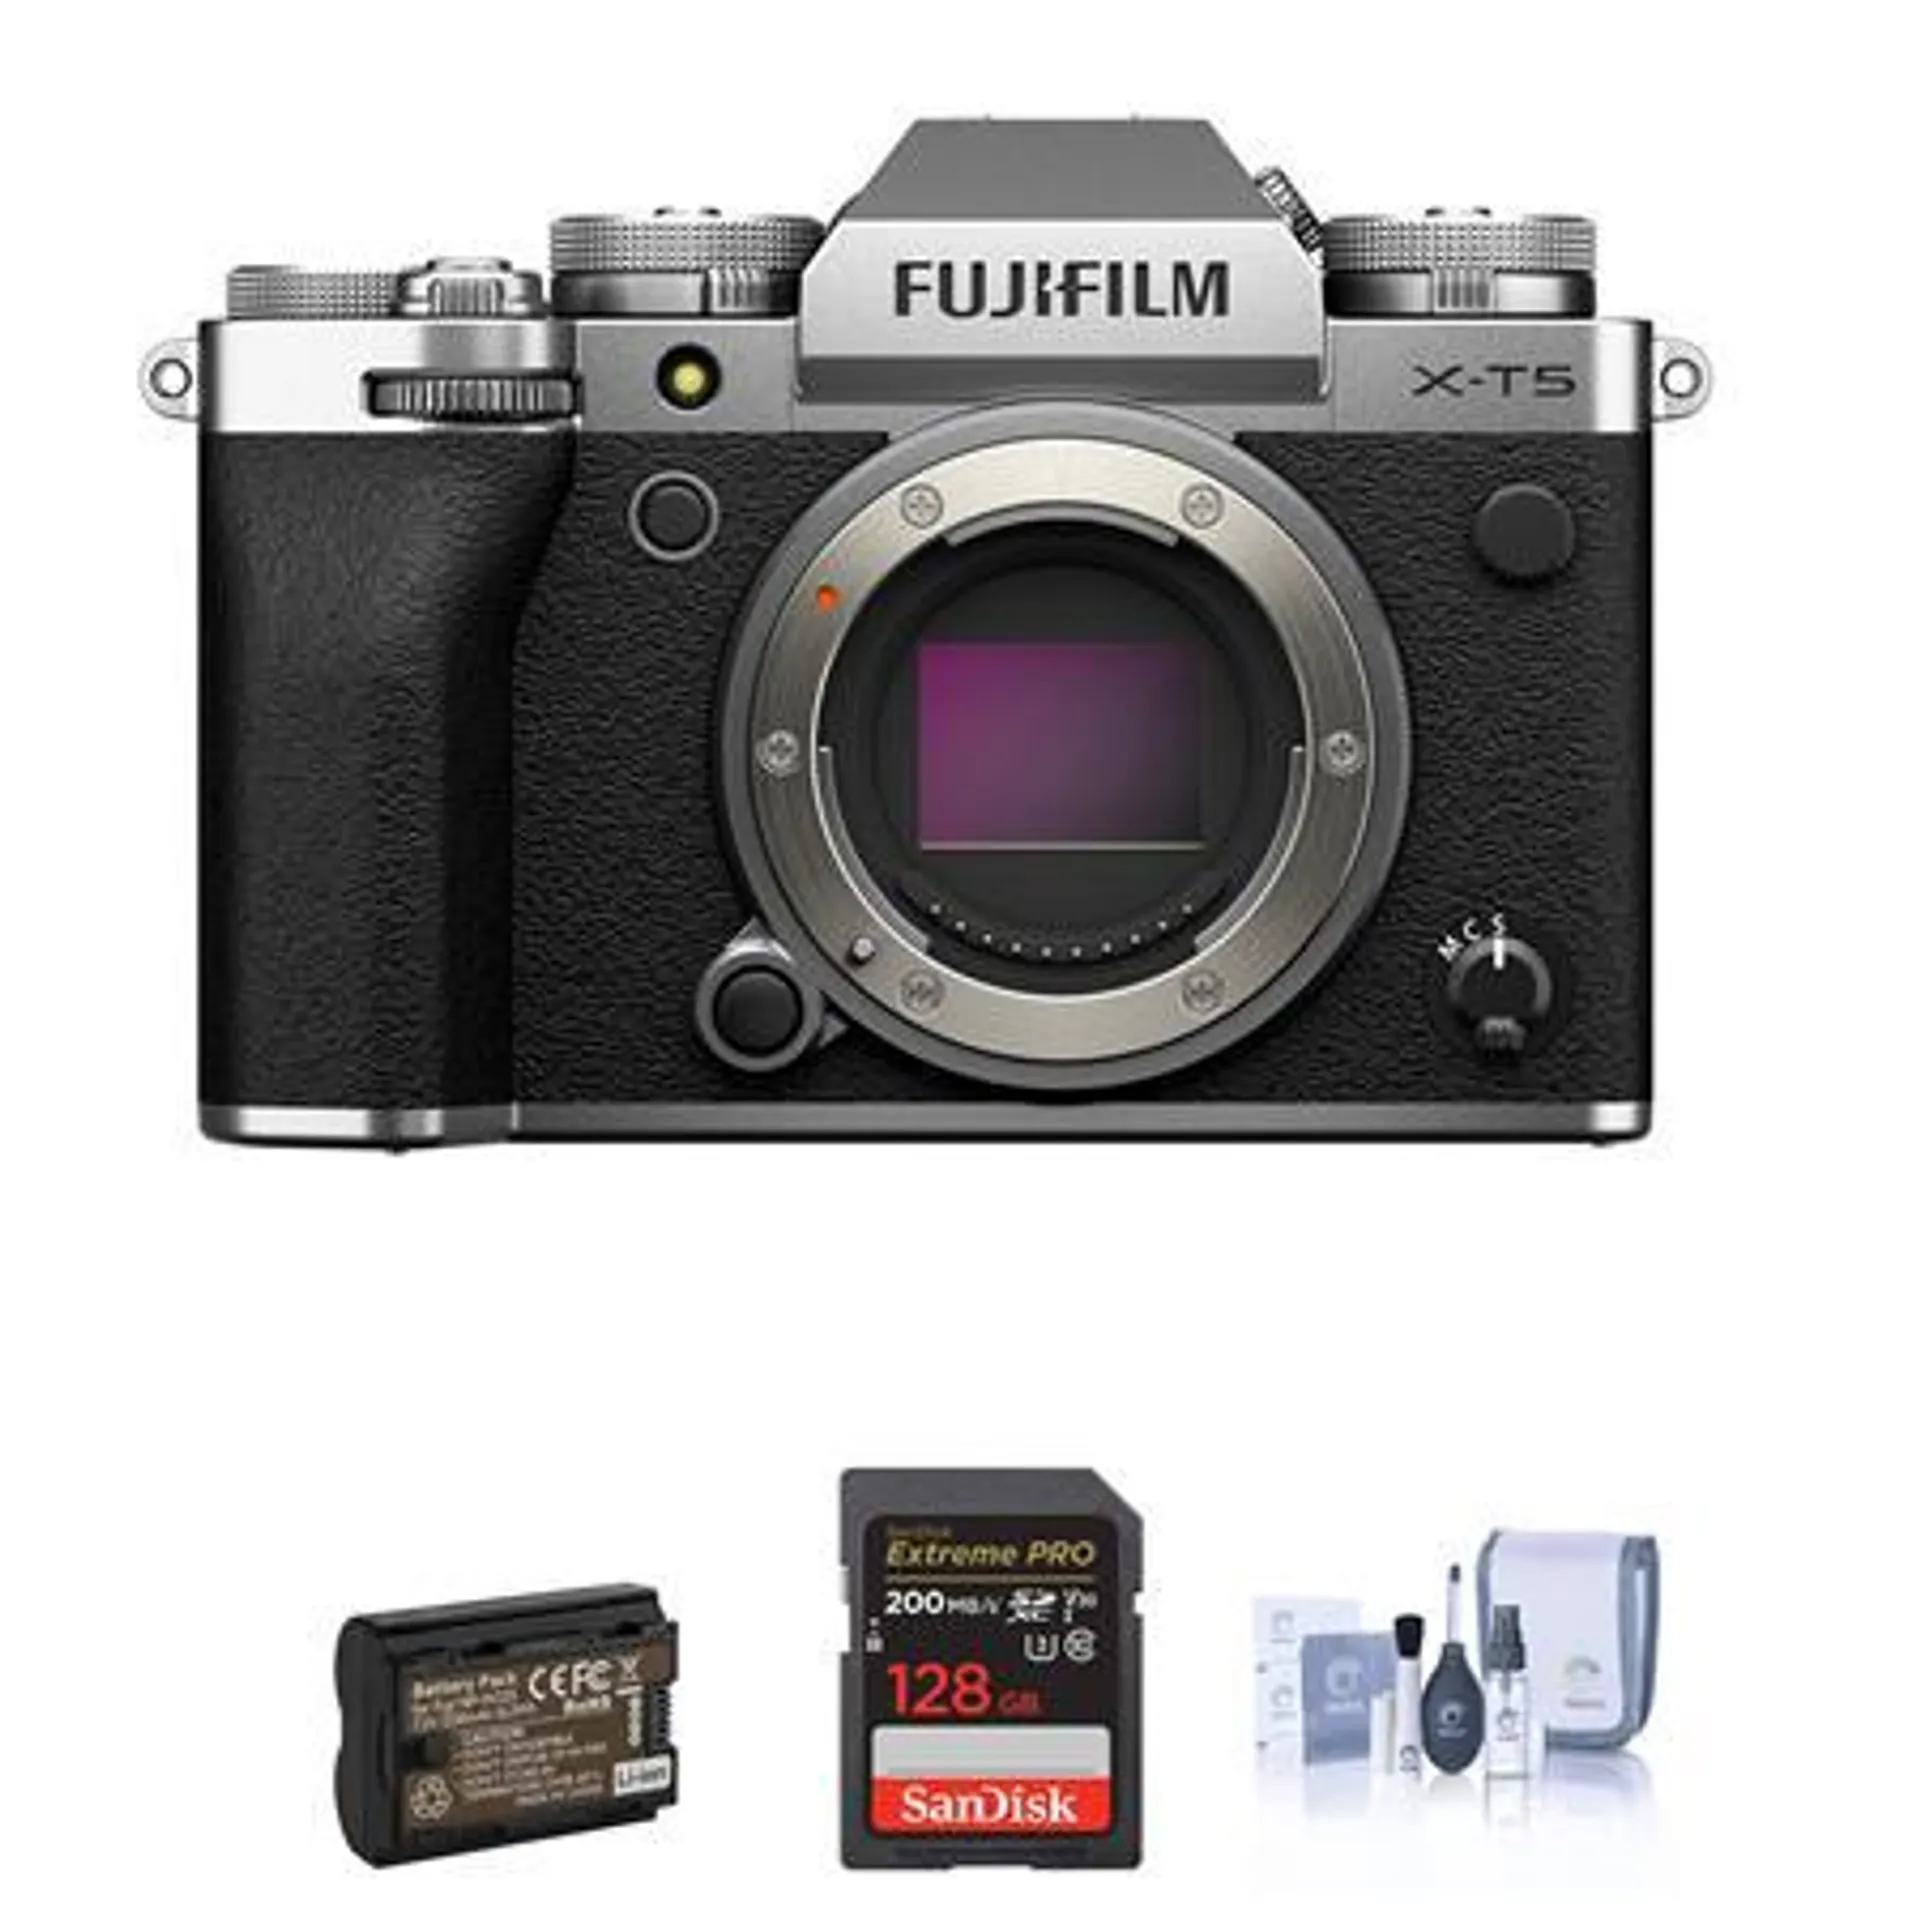 Fujifilm X-T5 Mirrorless Camera, Silver Bundle with 128GB SD Card, Extra Battery, Cleaning Kit